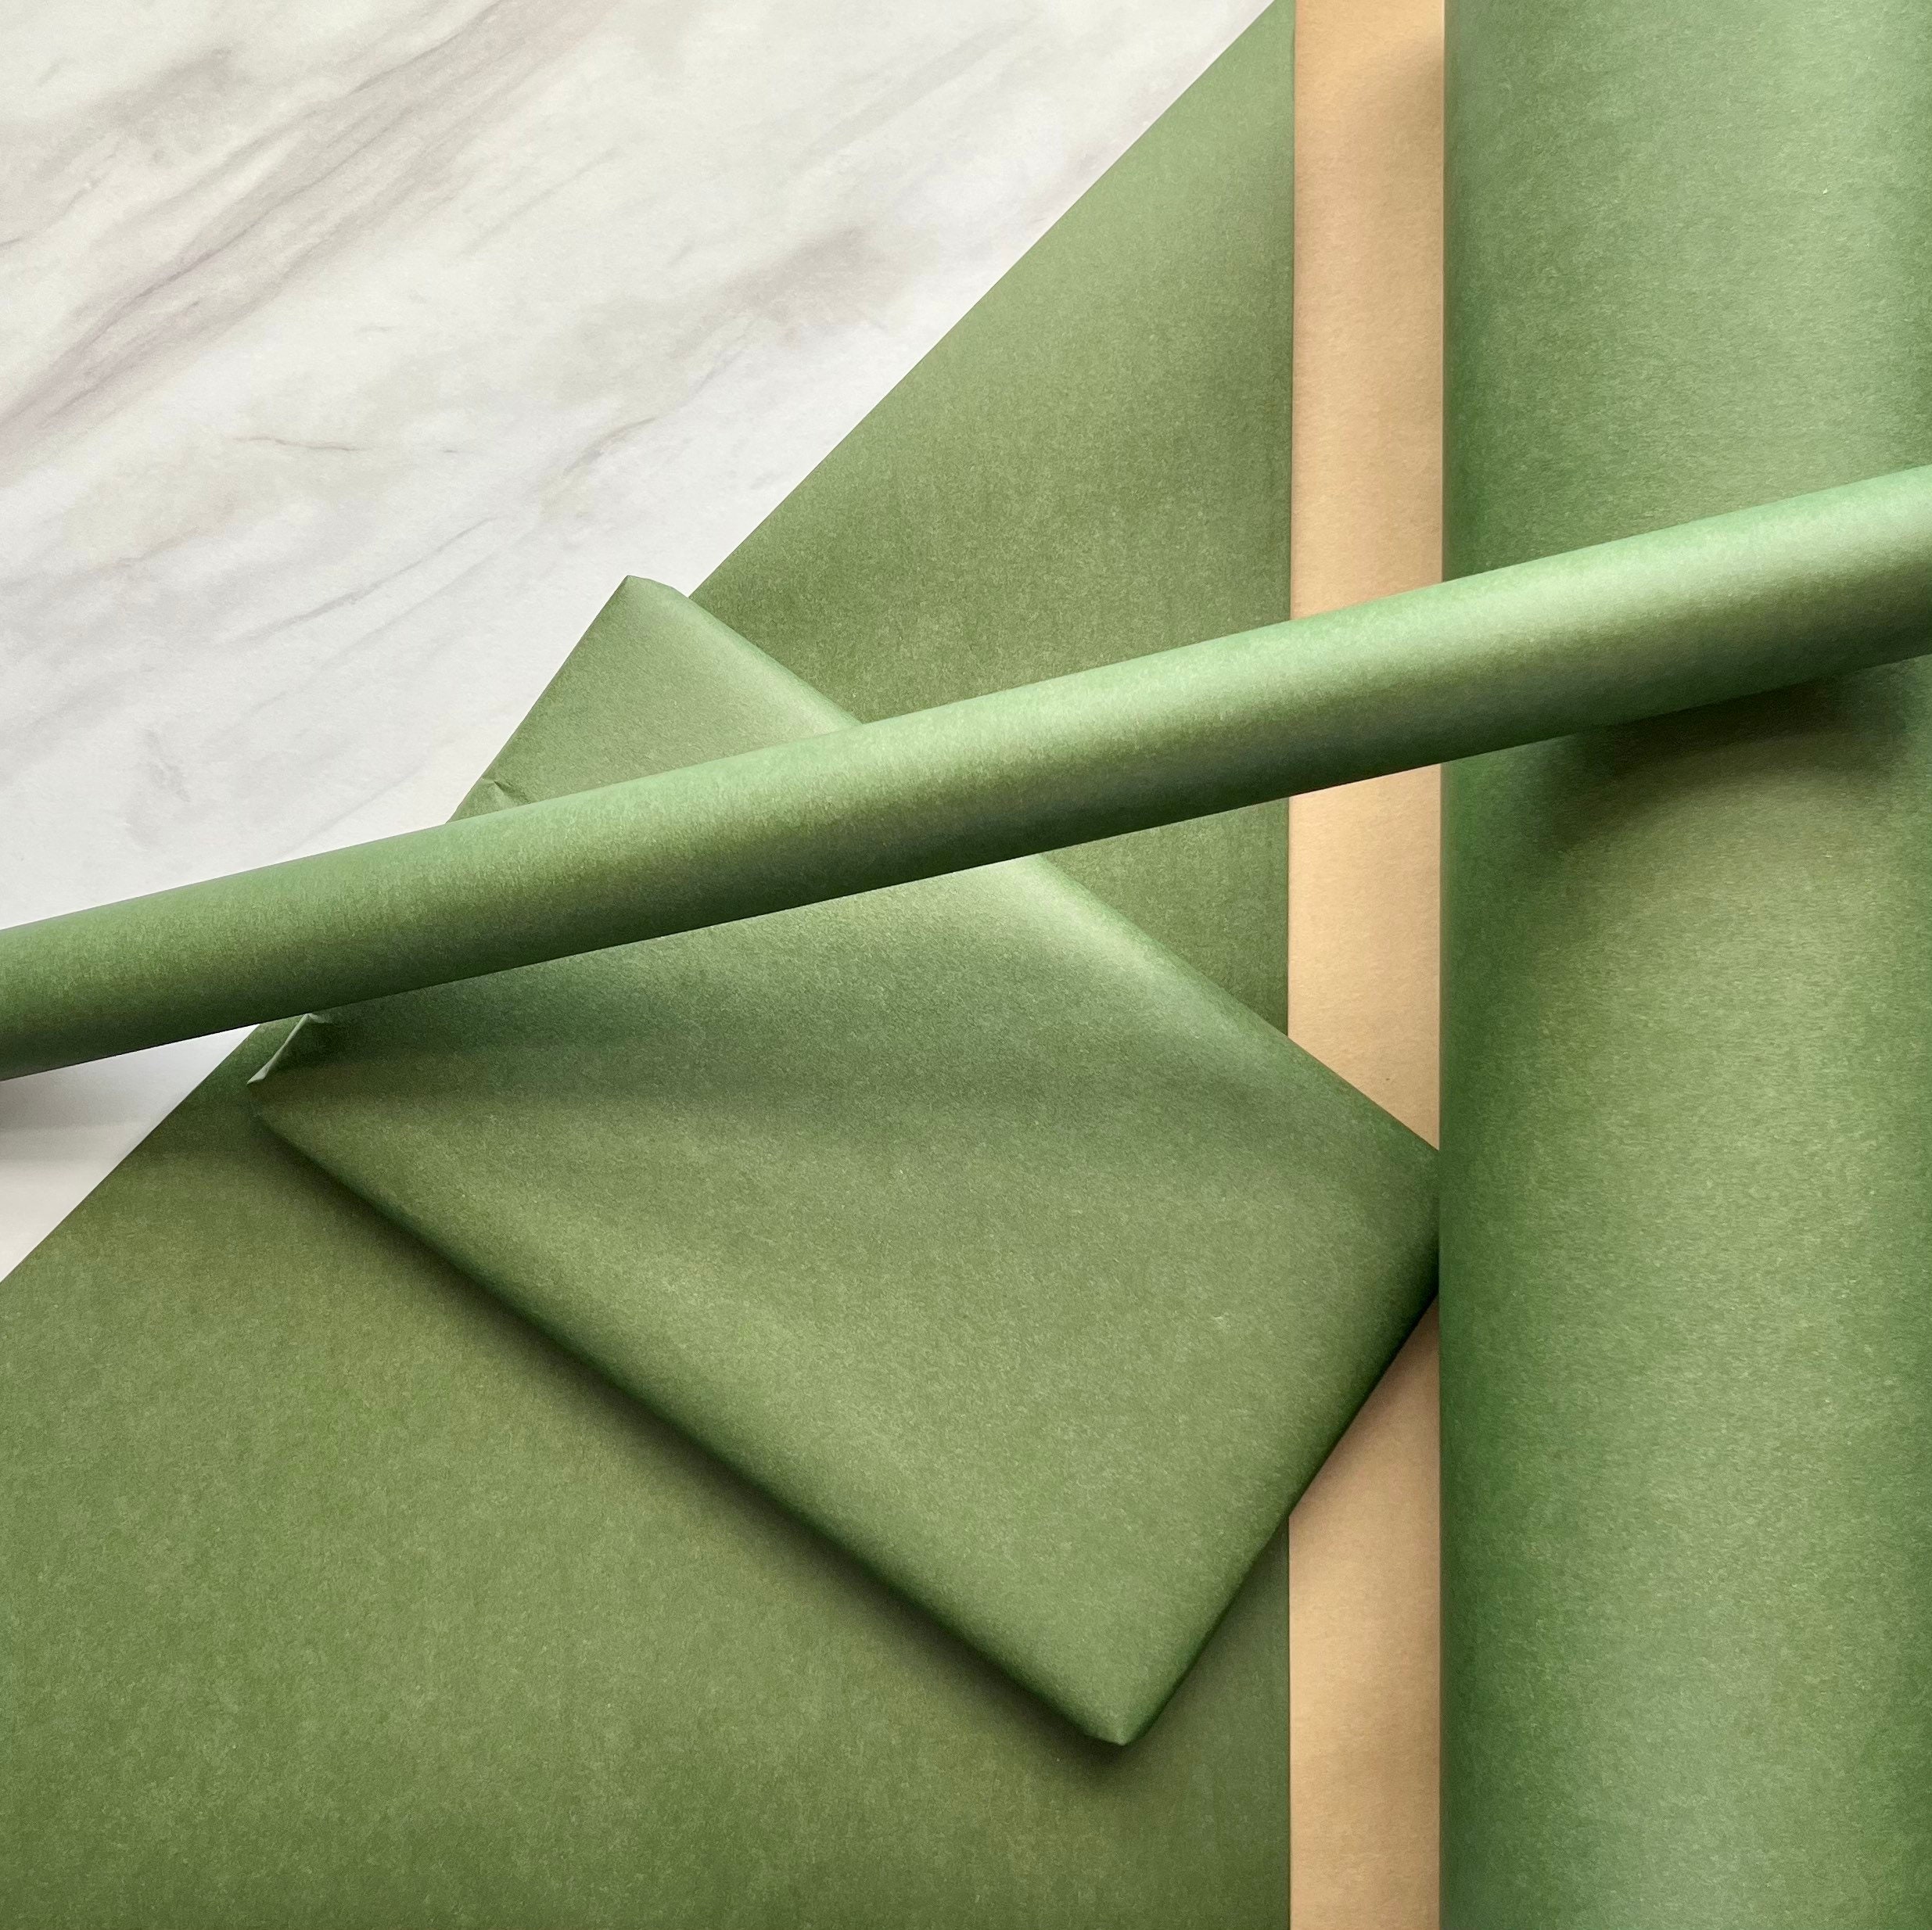 Mid Sage Green Eco Friendly Wrapping Paper - Solid Plain Green - Simpl –  Heart & Home Designs